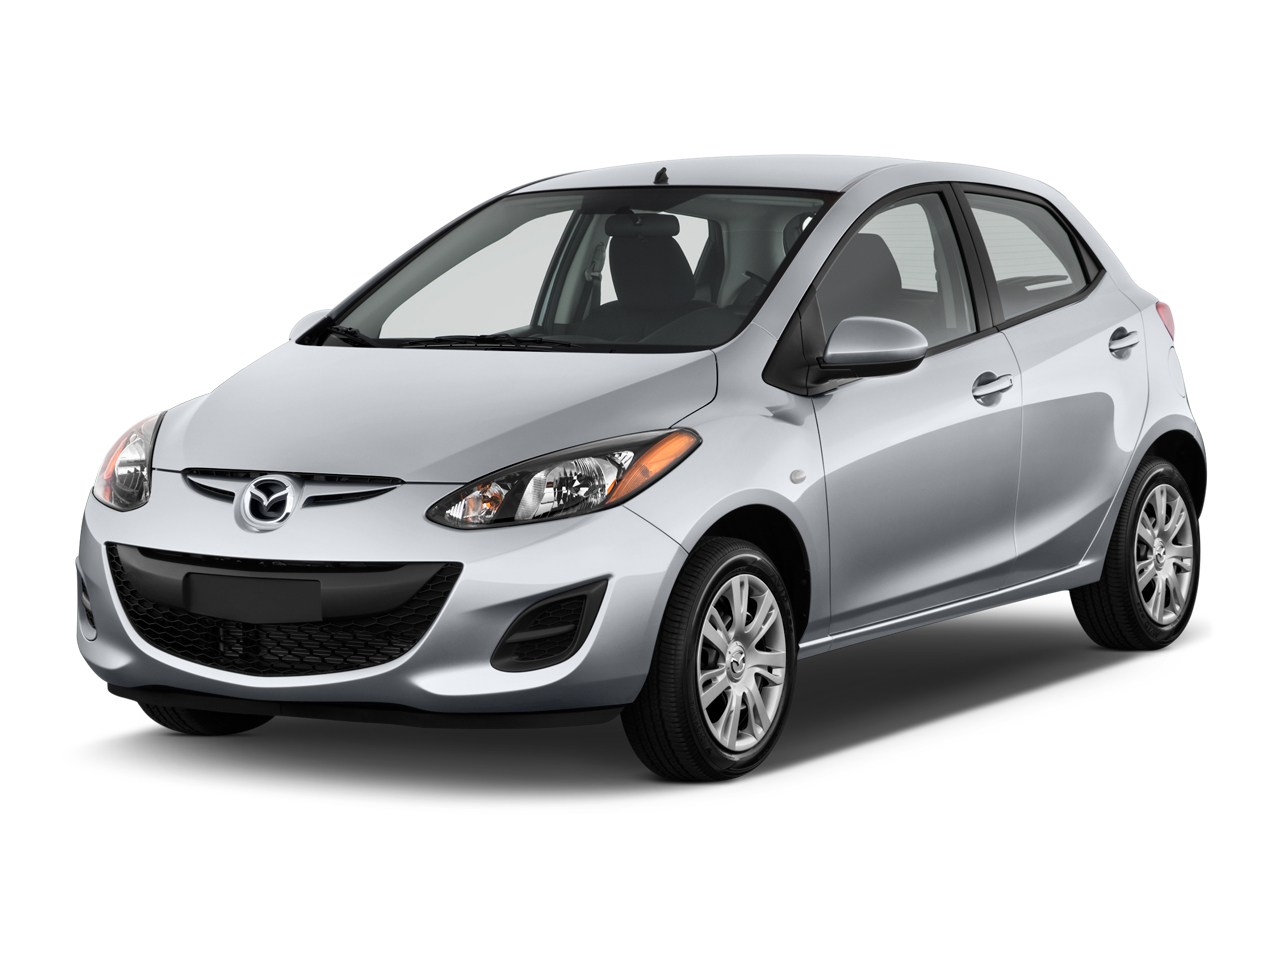 2012 Mazda Mazda2 Review Ratings Specs Prices And Photos